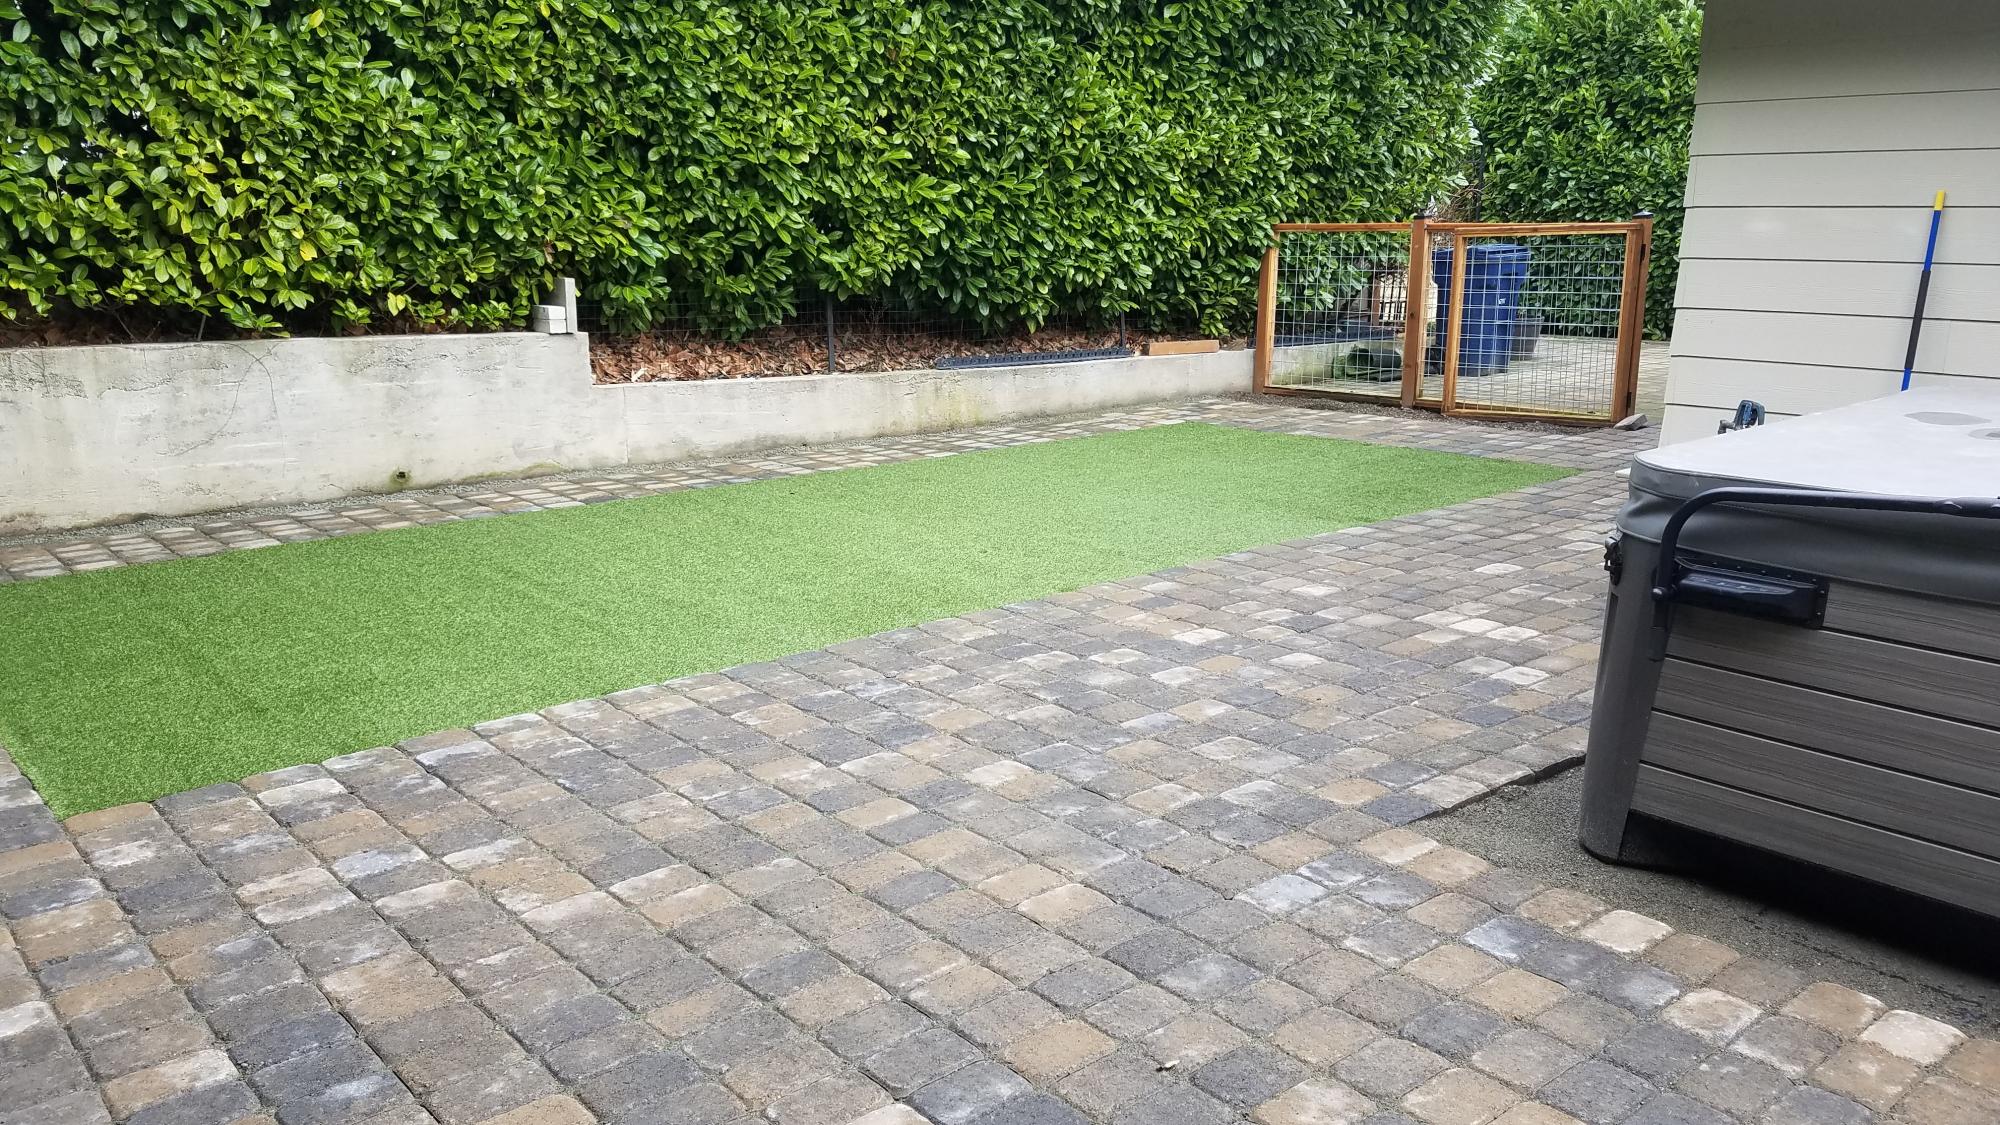 Why choose Ace 1 Construction & Landscaping for the Artificial Grass services?